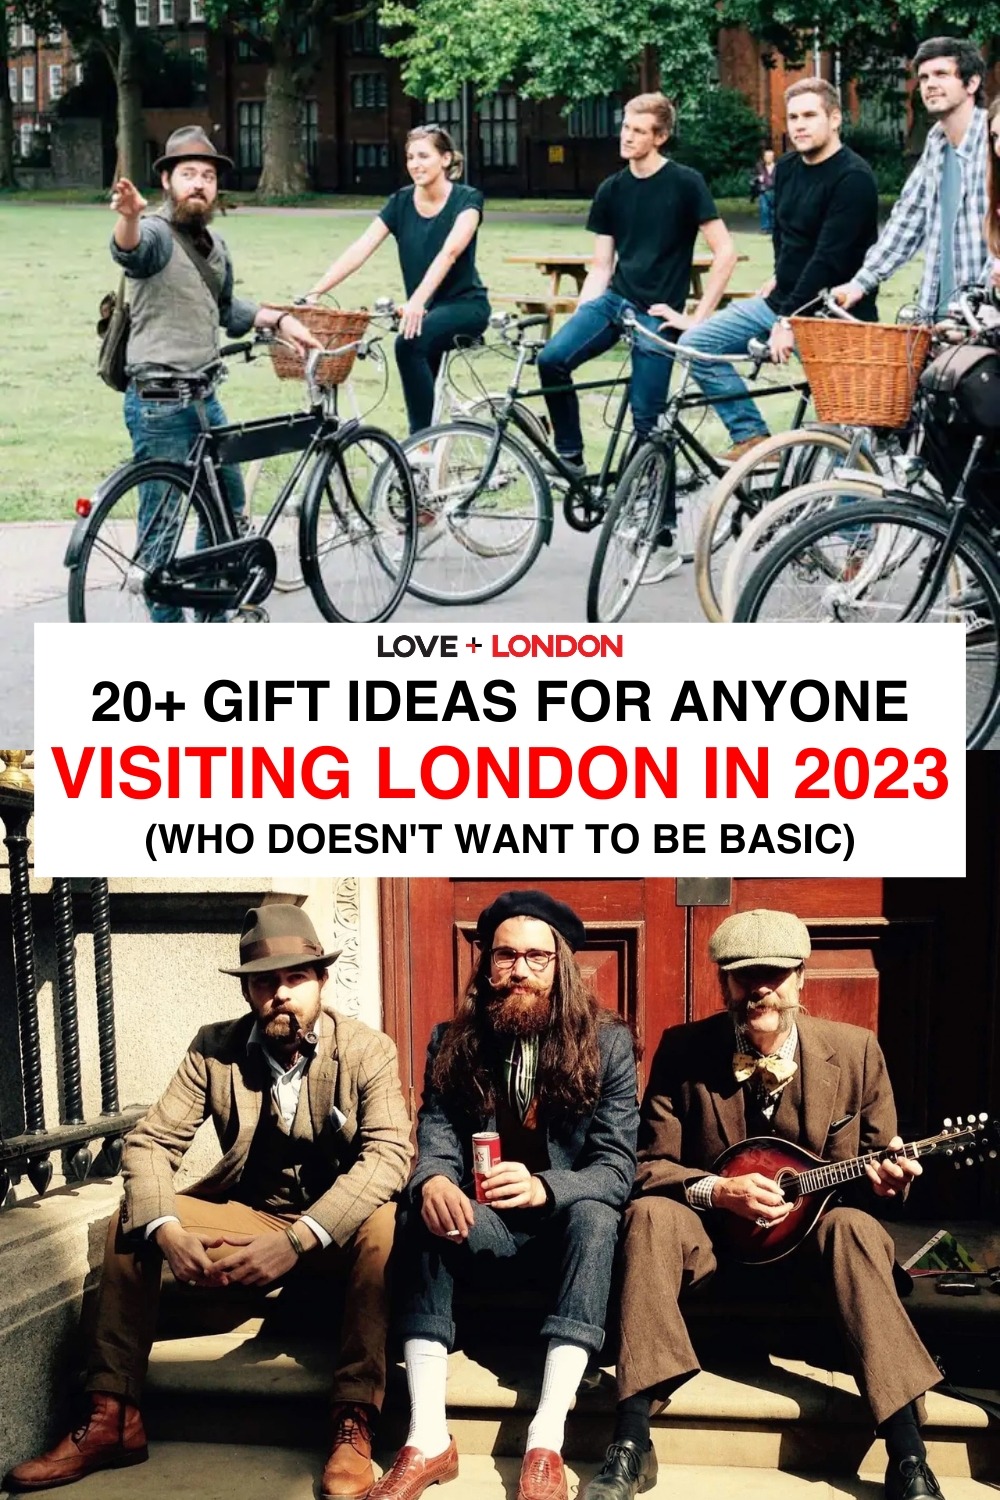 Gift Ideas For Anyone Visiting London In 2023 (Who Doesn’t Want To Be Basic)